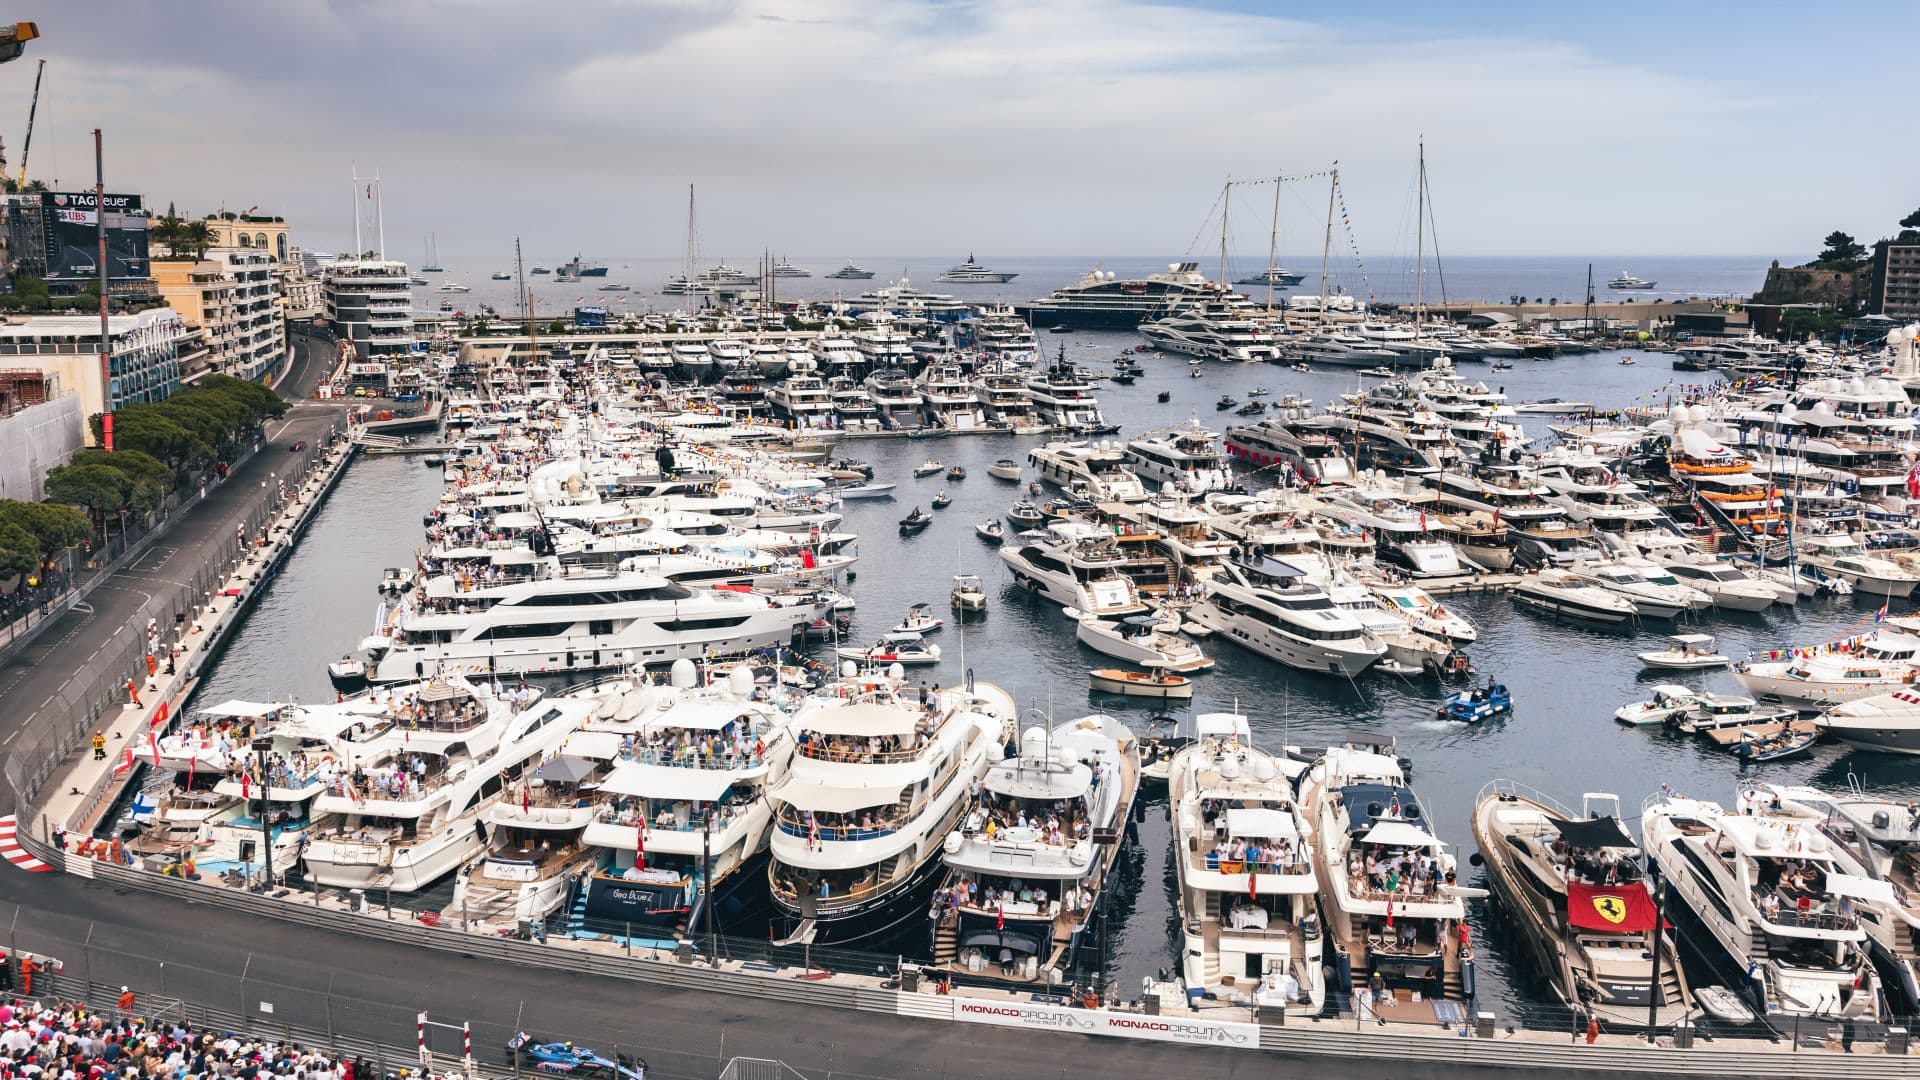 The Monaco Grand Prix: There's Nothing Else Like It